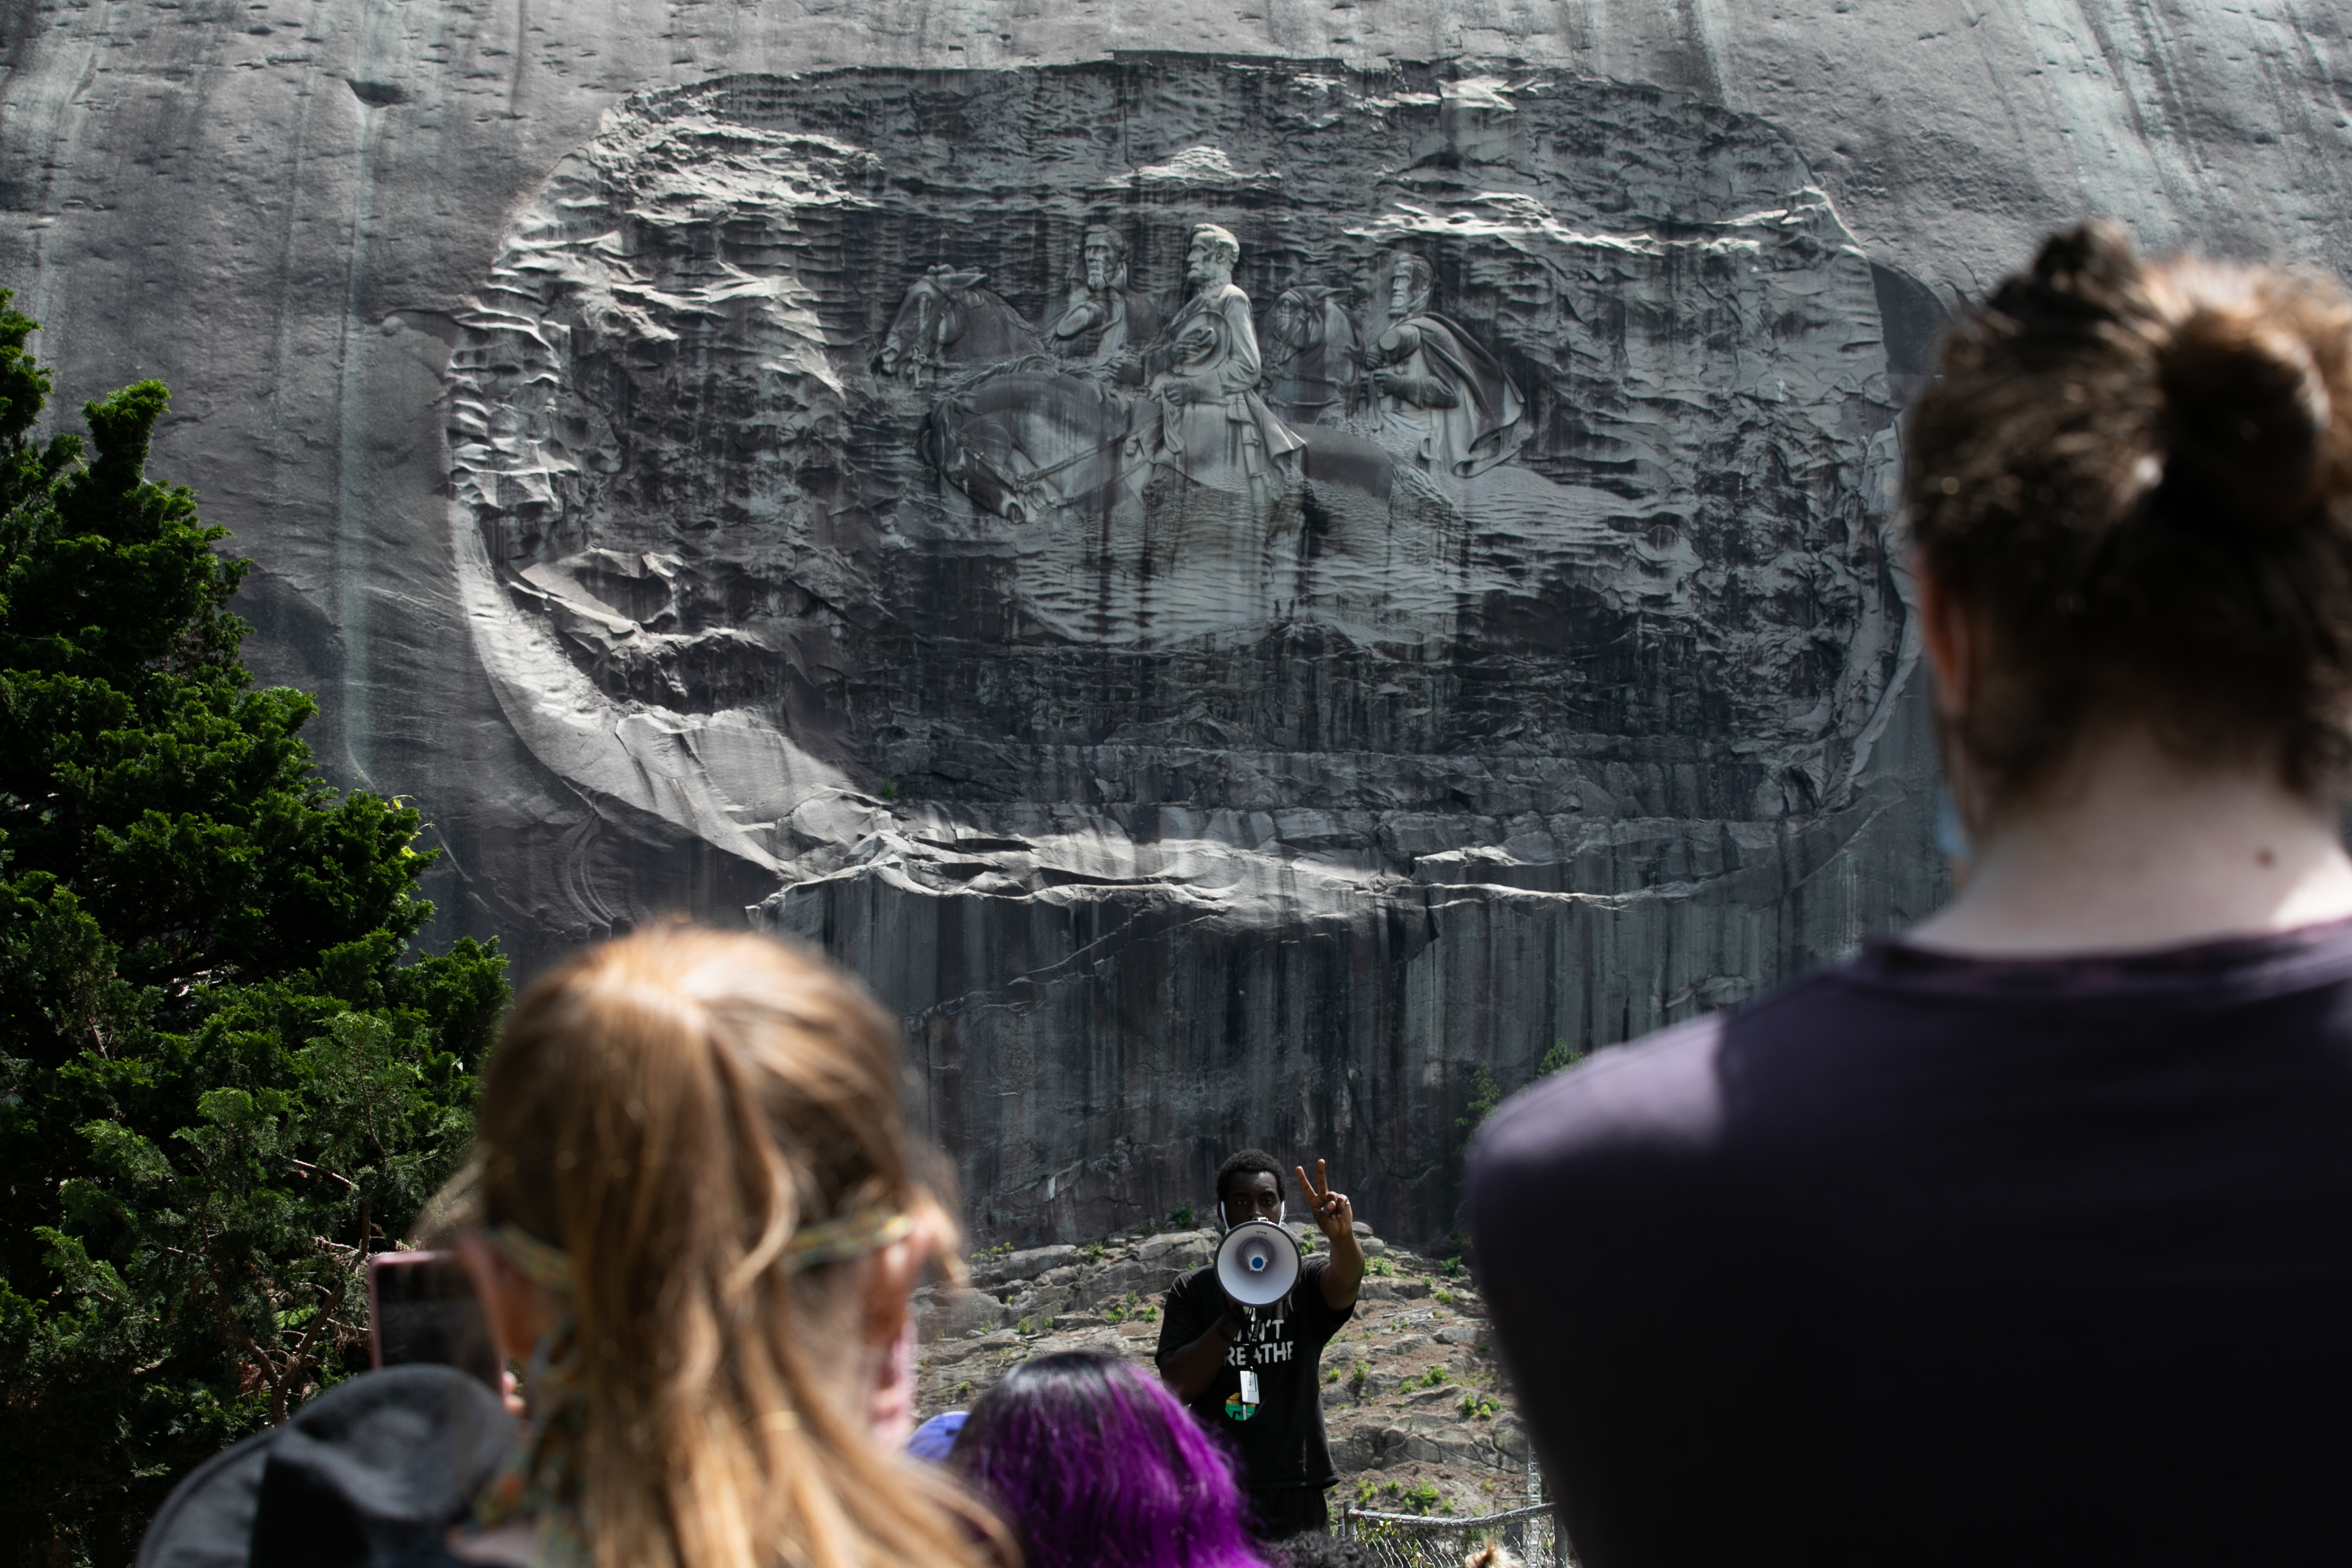 STONE MOUNTAIN, GA - JUNE 16: Organizer Quintavious Rhodes addresses Black Lives Matter protesters during a march in Stone Mountain Park to the Confederate carving etched into the stone side of the mountain on June 16, 2020 in Stone Mountain, Georgia. The march is to protest confederate monuments and recent police shootings. Stone Mountain Park features a Confederate Memorial carving depicting Stonewall Jackson and Robert E. Lee, President Jefferson Davis. (Photo by Jessica McGowan/Getty Images)